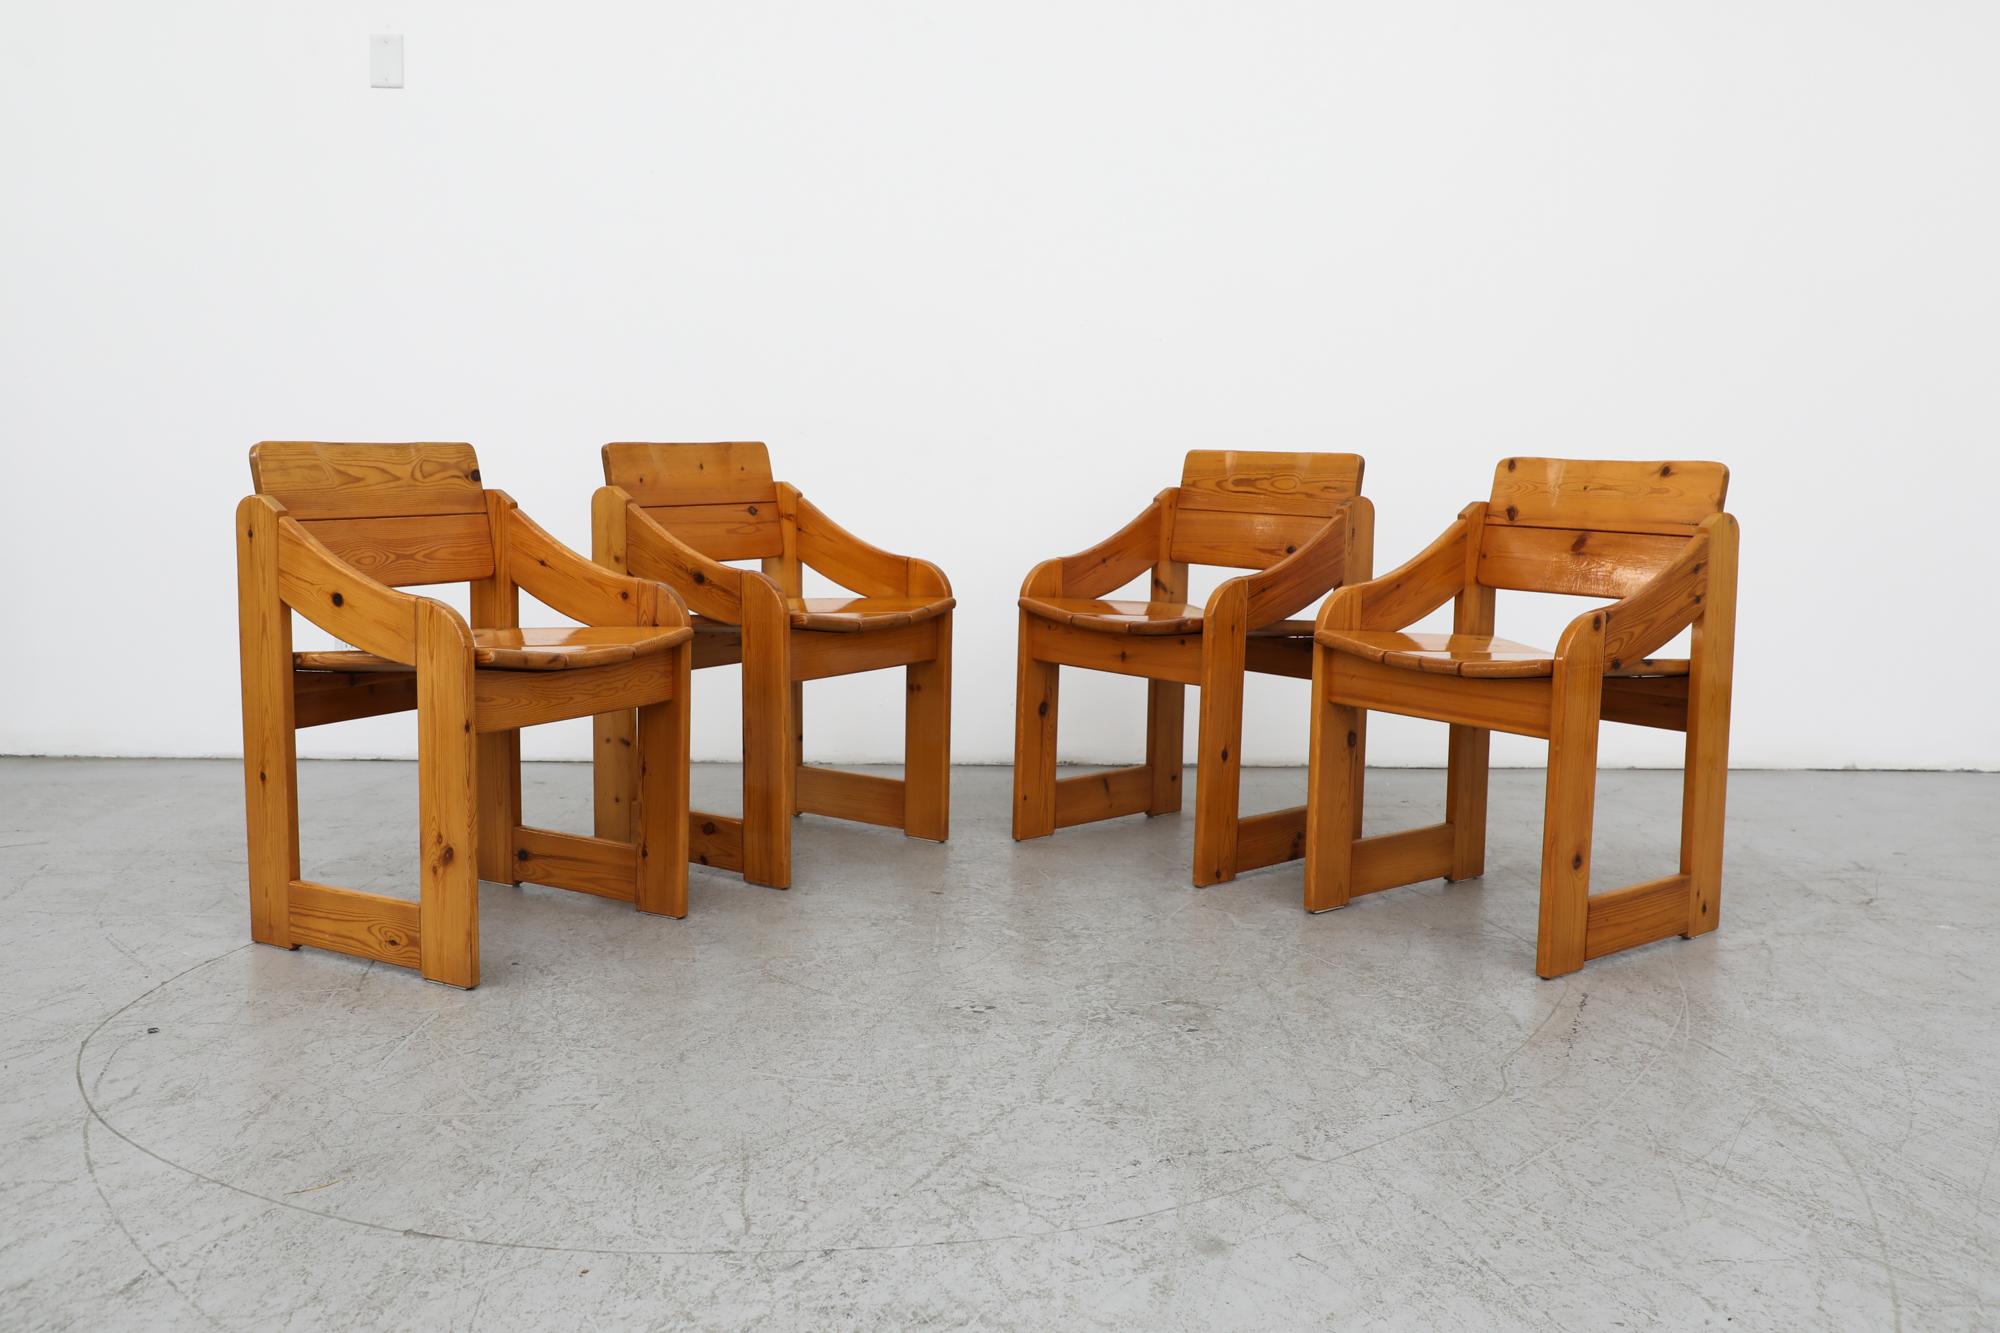 Dutch Set of 4 1970's Mod Ate van Apeldoorn Style Square Frame Pine Dining Chairs